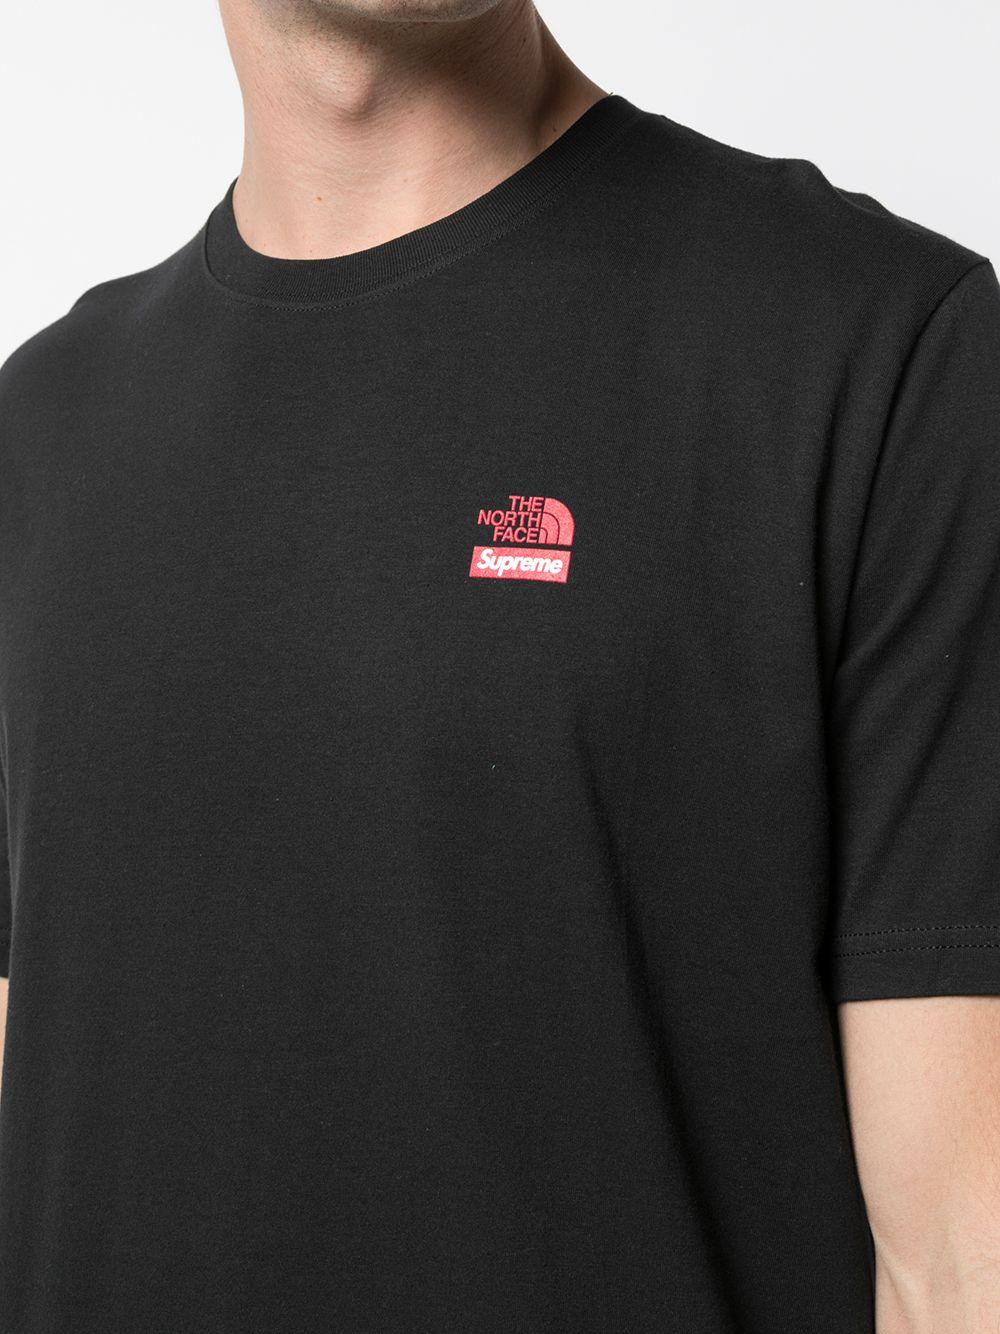 Supreme Cotton X The North Face T-shirt in Black for Men | Lyst